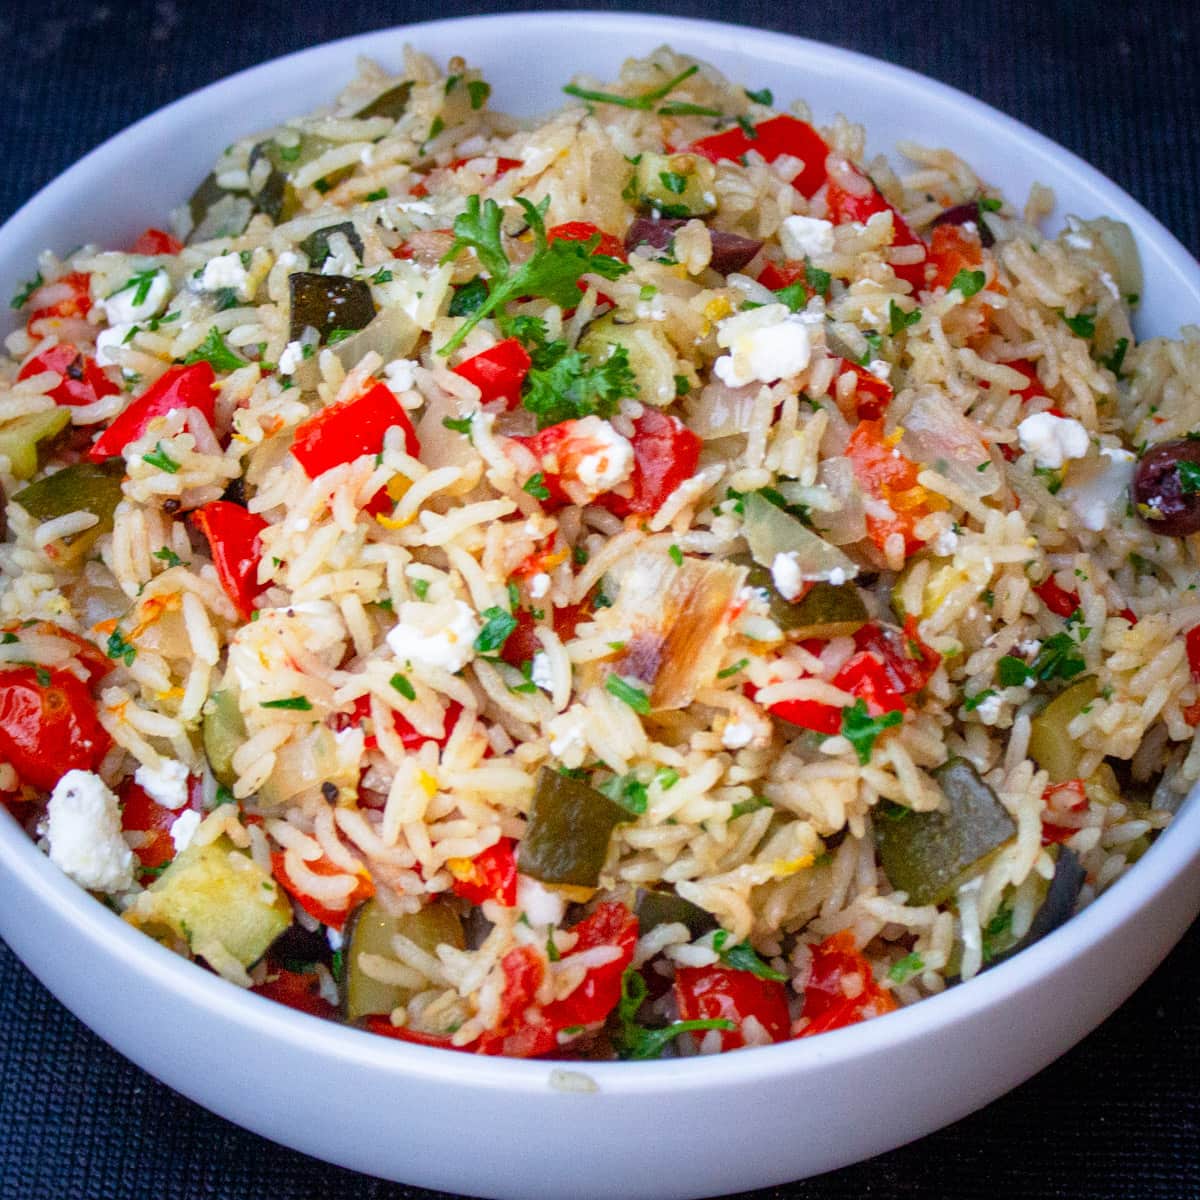 Mediterranean Rice Recipe With Vegetables (Baked)